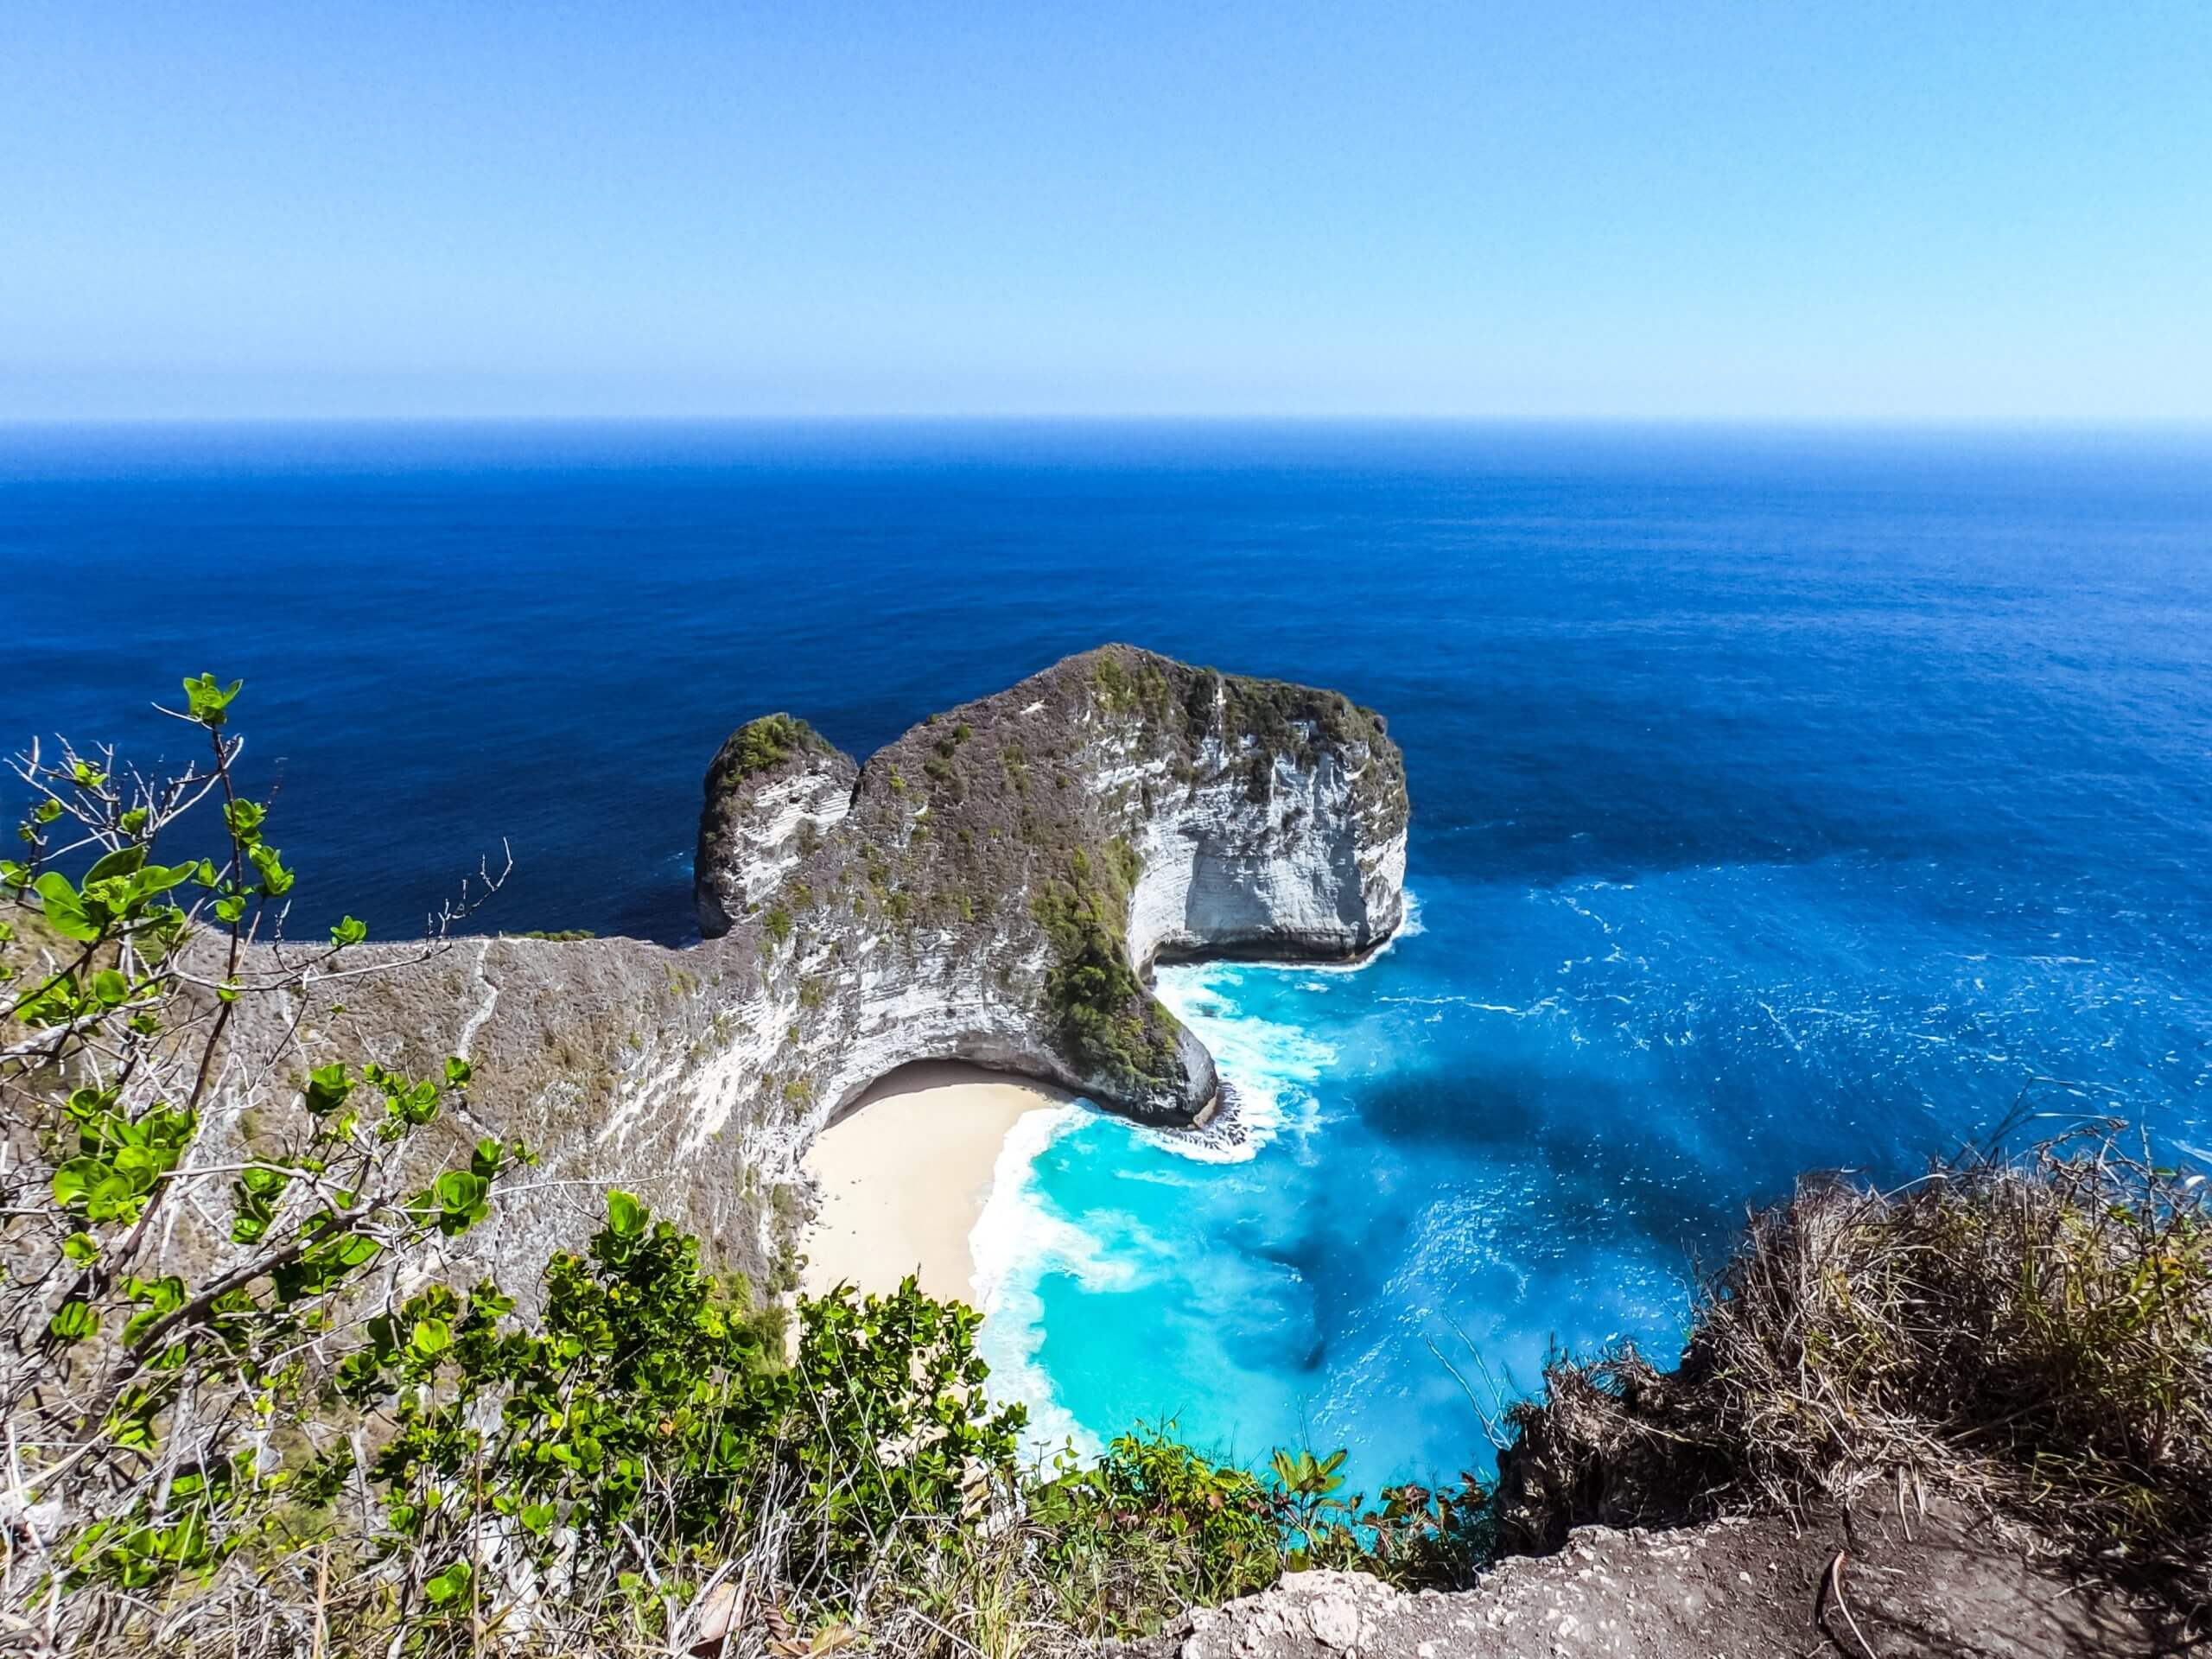 Day Guide To Nusa Penida Island Indonesia Let S Travel It Up